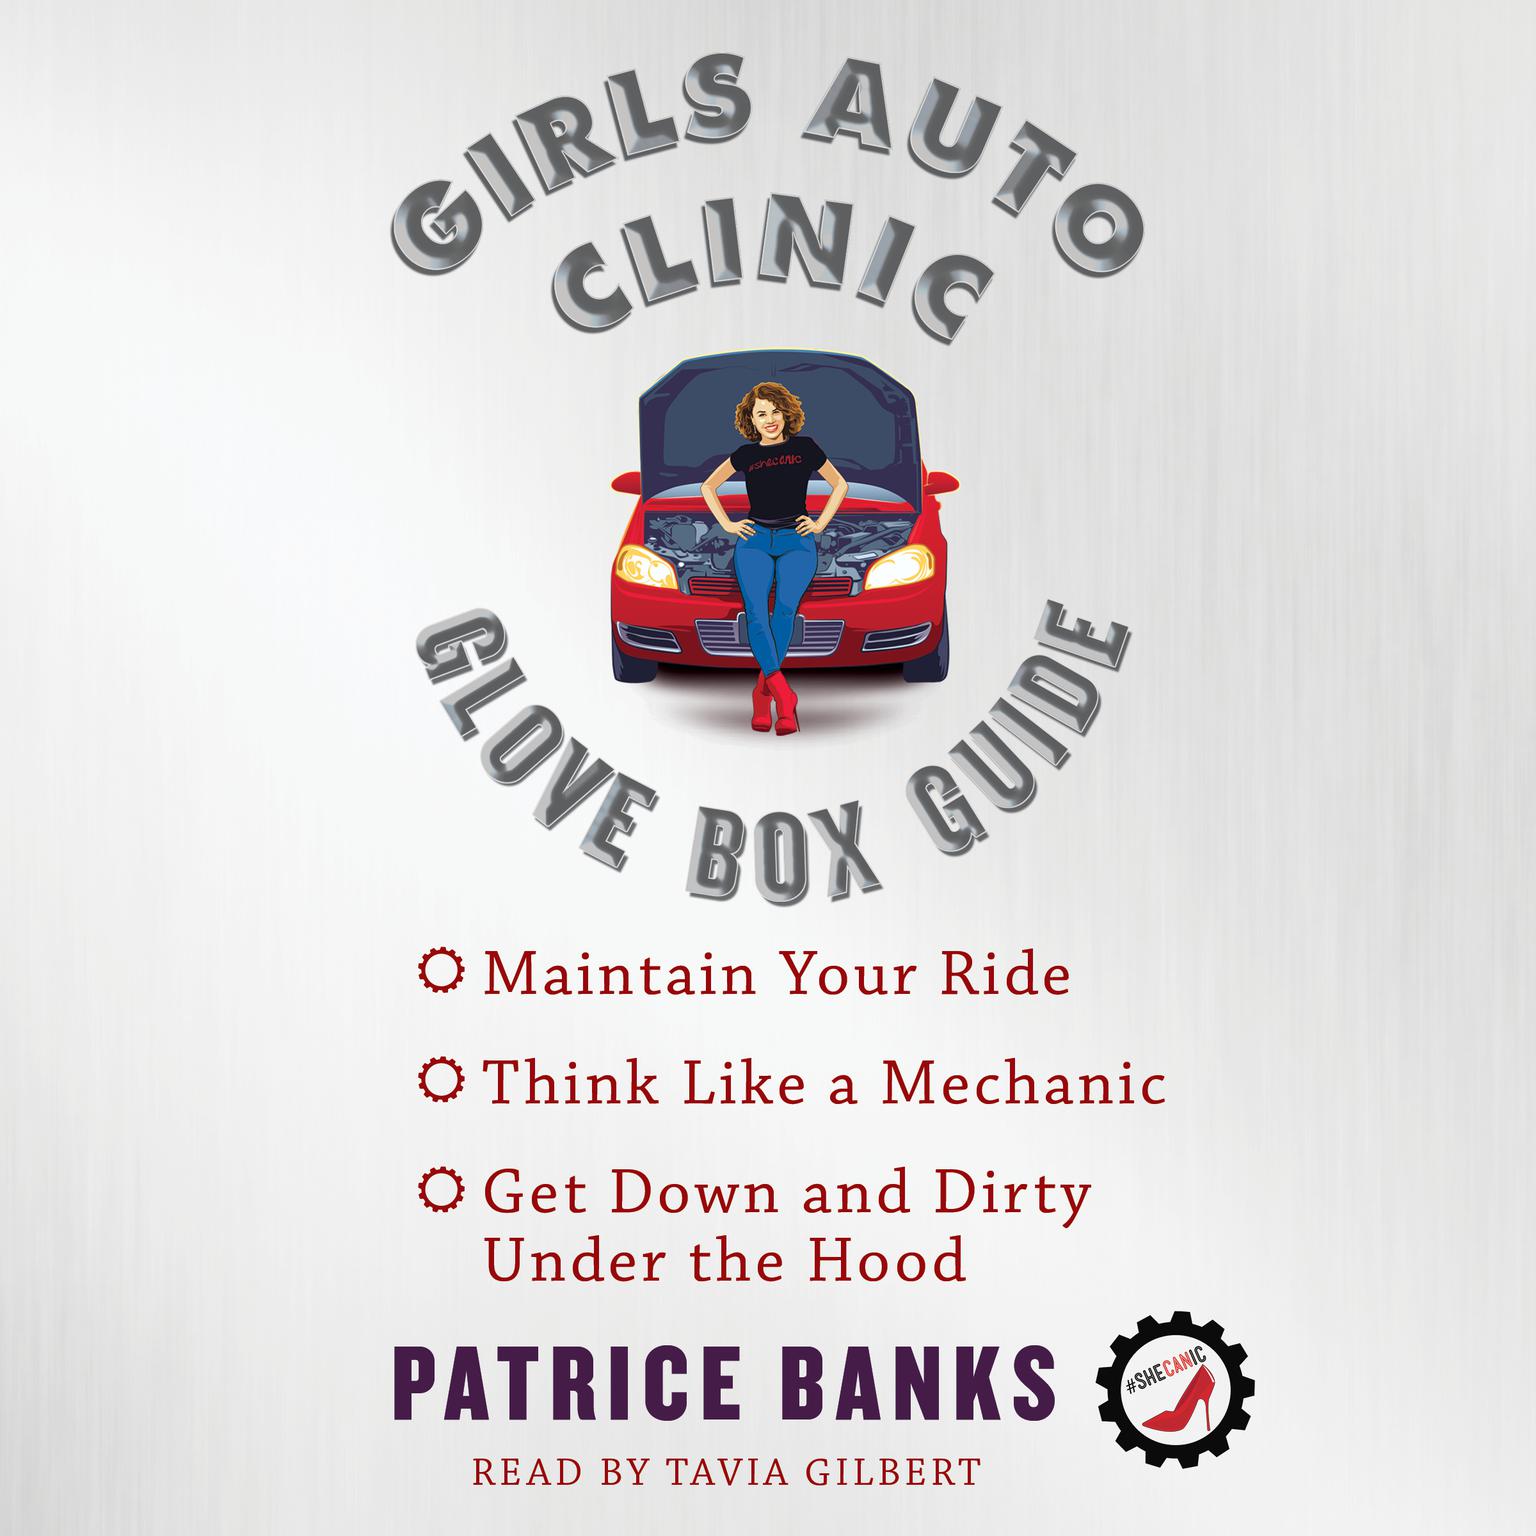 Girls Auto Clinic Glove Box Guide Audiobook, by Patrice Banks